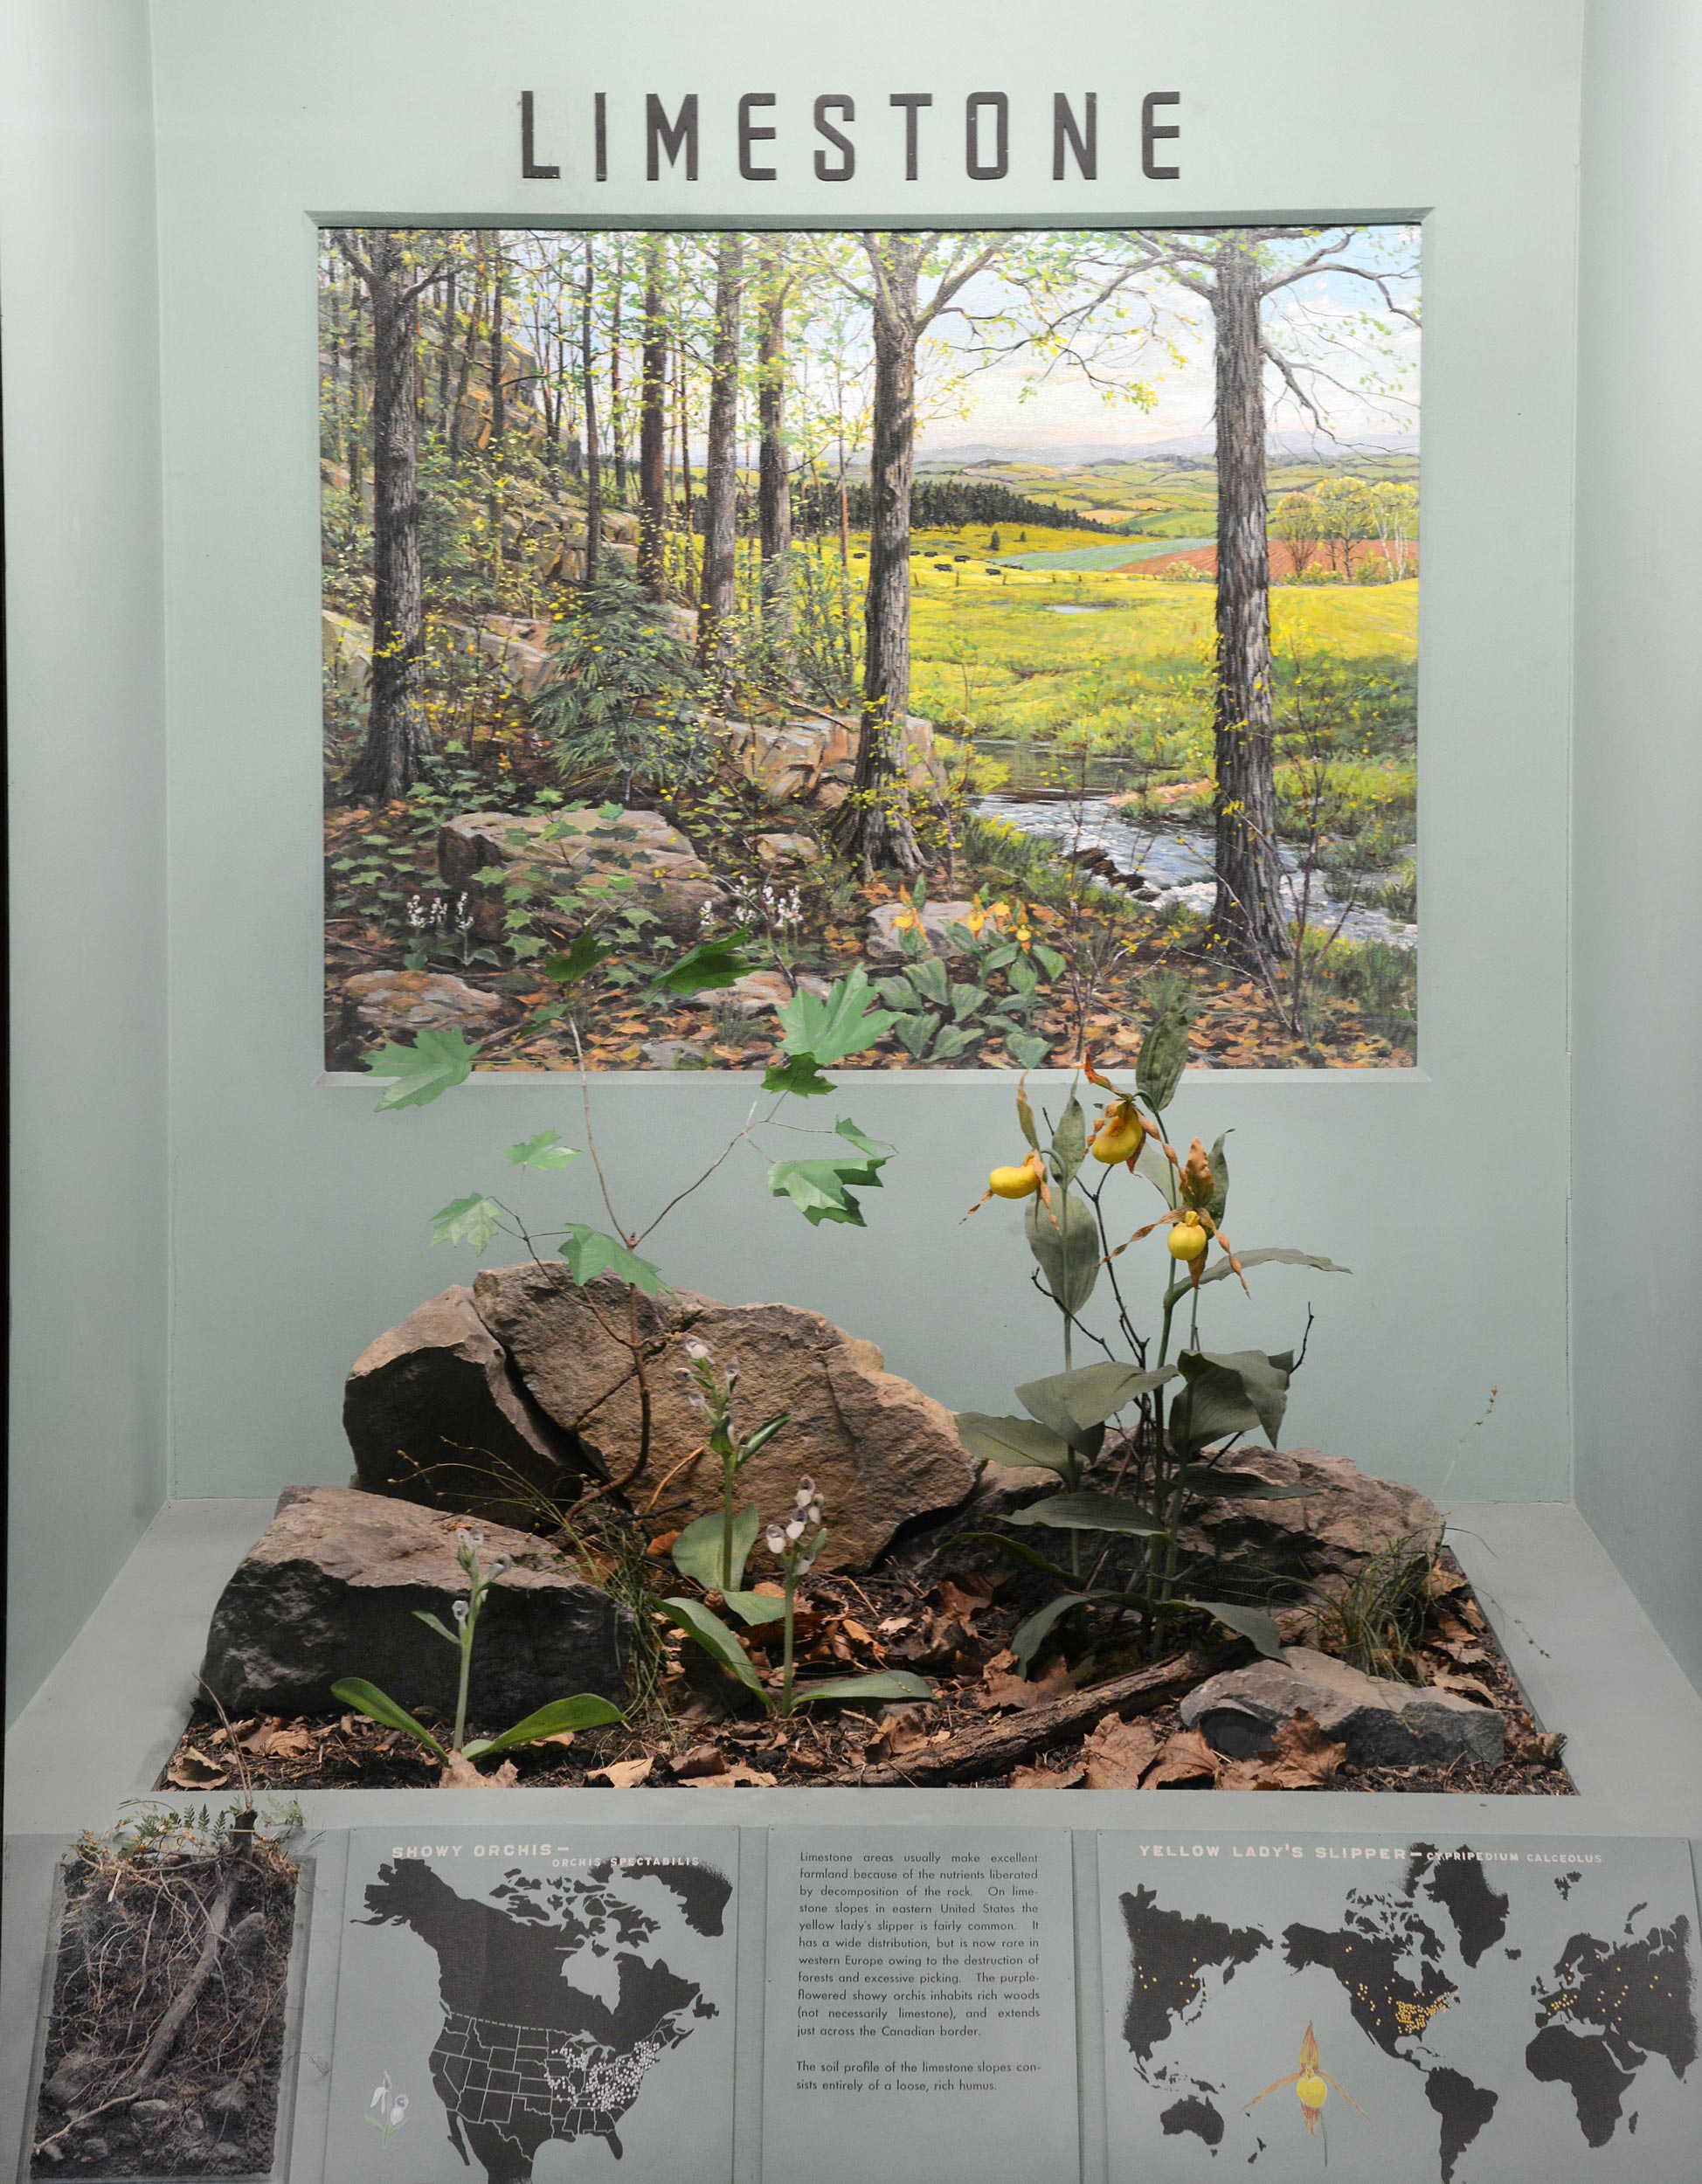 Museum case containing illustrations, graphics and models explaining the relations of plants to geology and soil in limestone terrain.